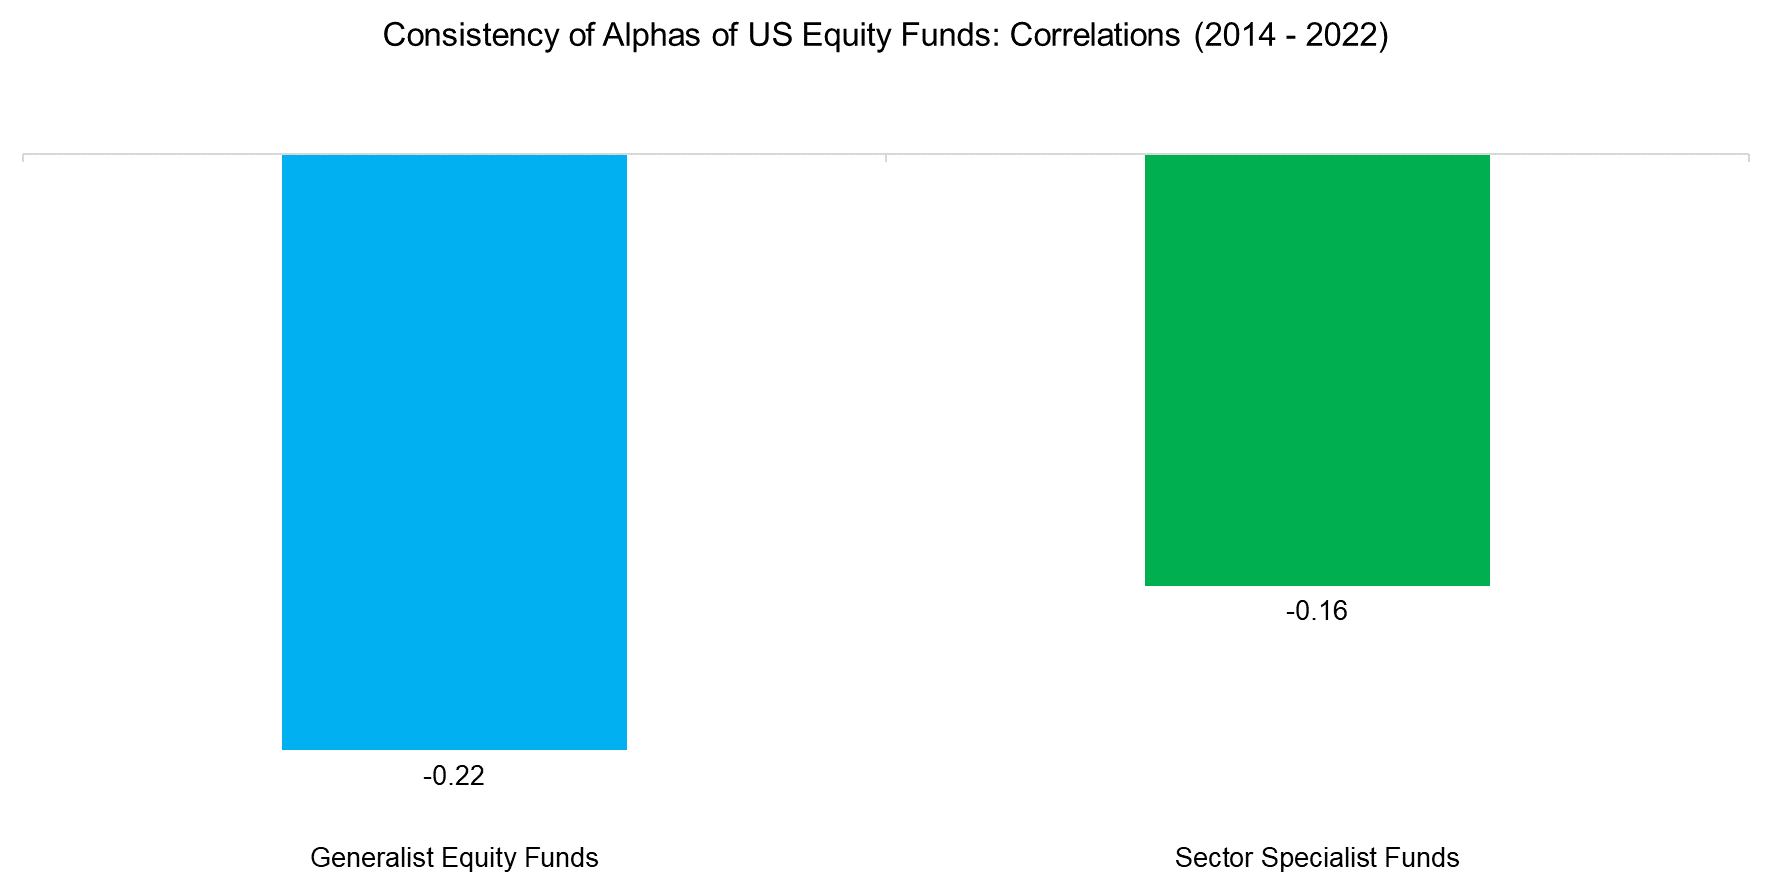 Consistency of Alphas of US Equity Funds Correlations (2014 - 2022)